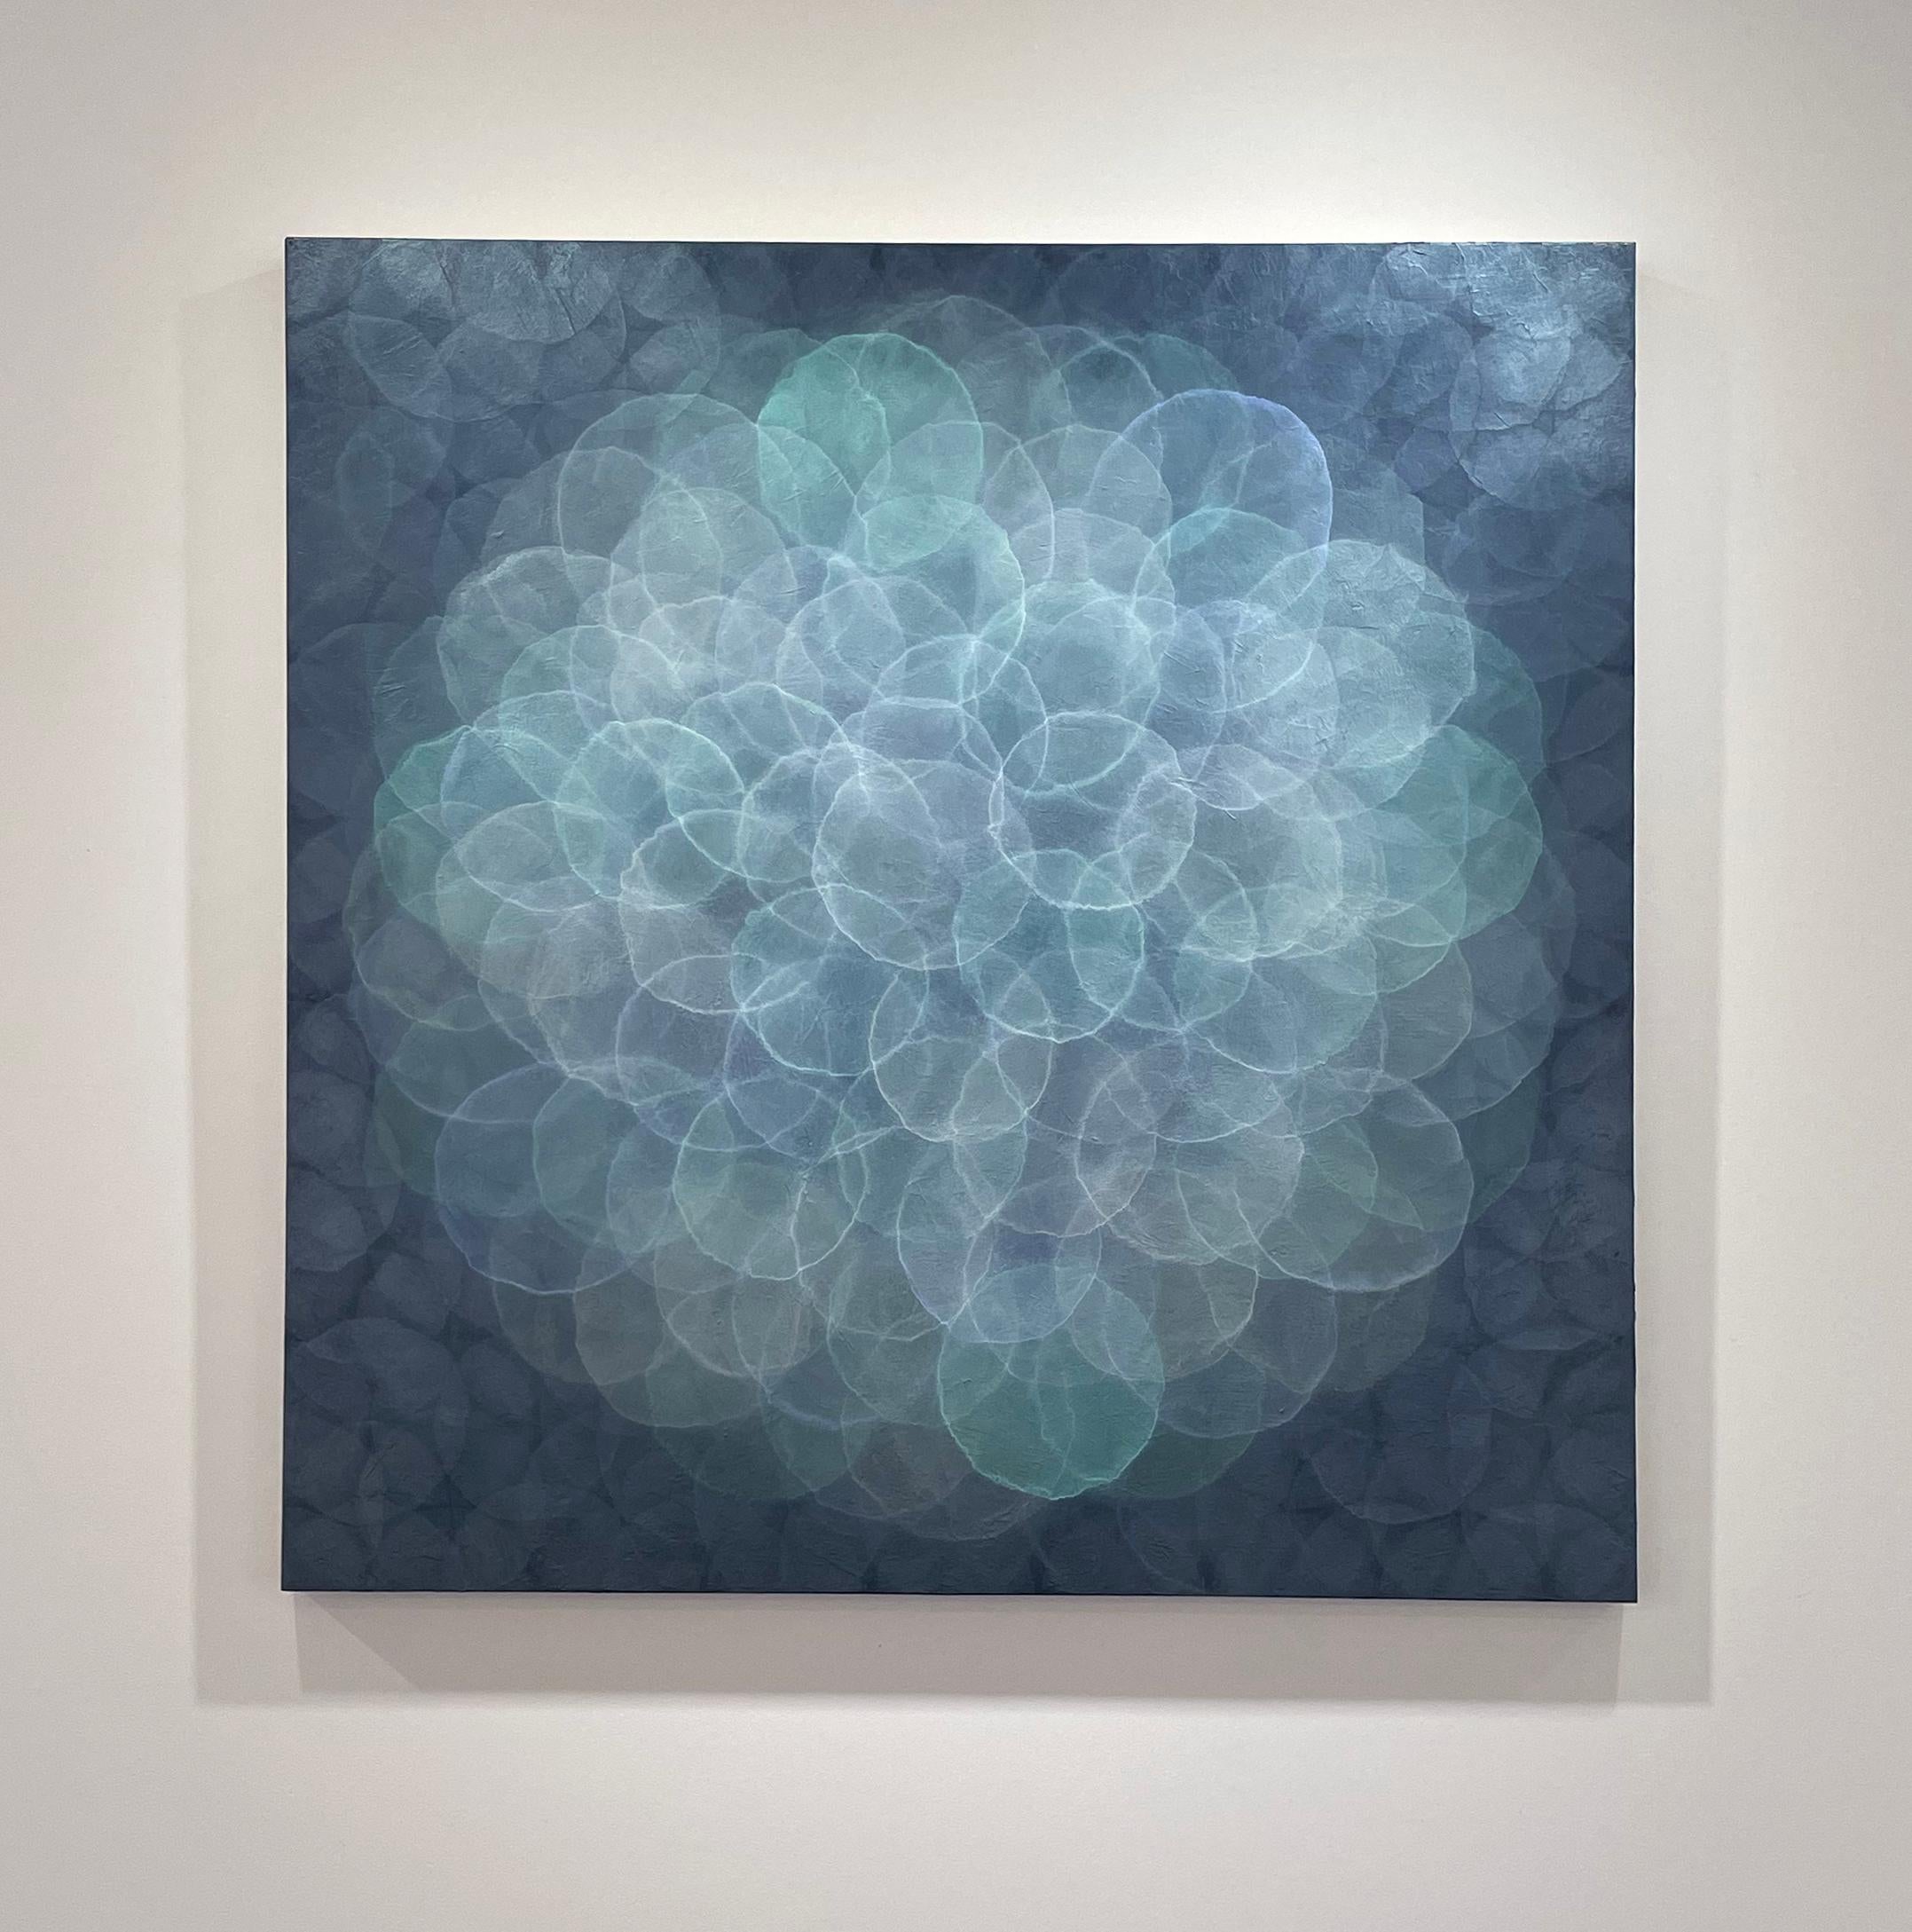 This abstract painting by Roger Mudre has a cool blue, green, and silver palette. Made with acrylic paint over marble dust and mica powder on cradled birch panel, it features small, overlapping circles that almost appear to glow, assembled in a